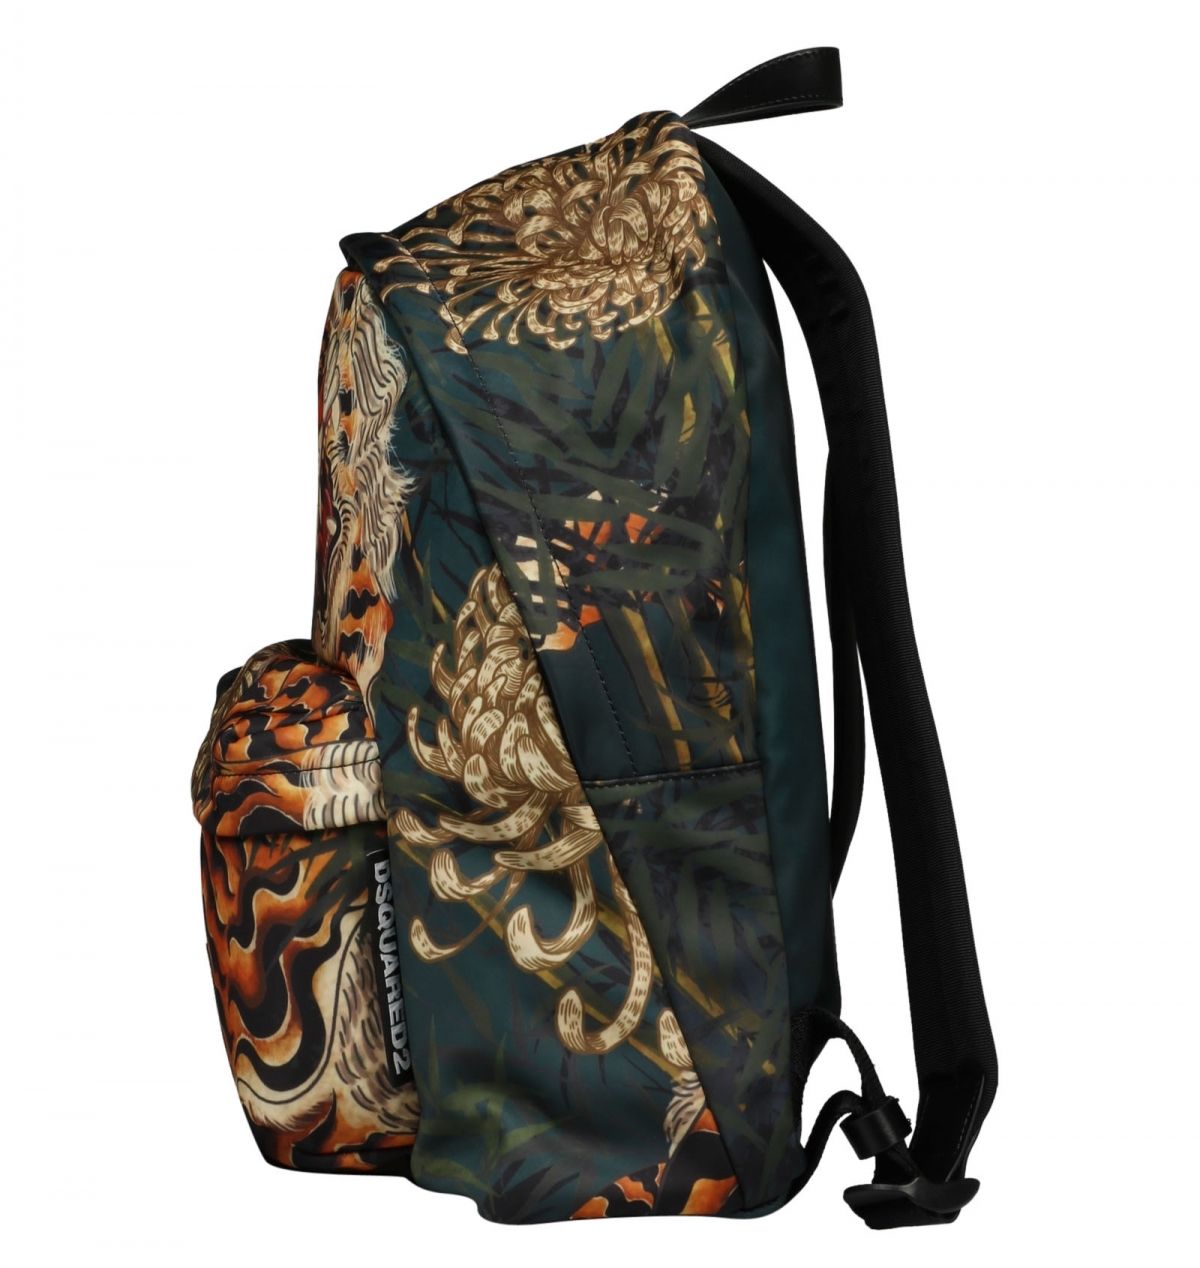 Elegant Green Tiger Print Backpack with Leather Accents